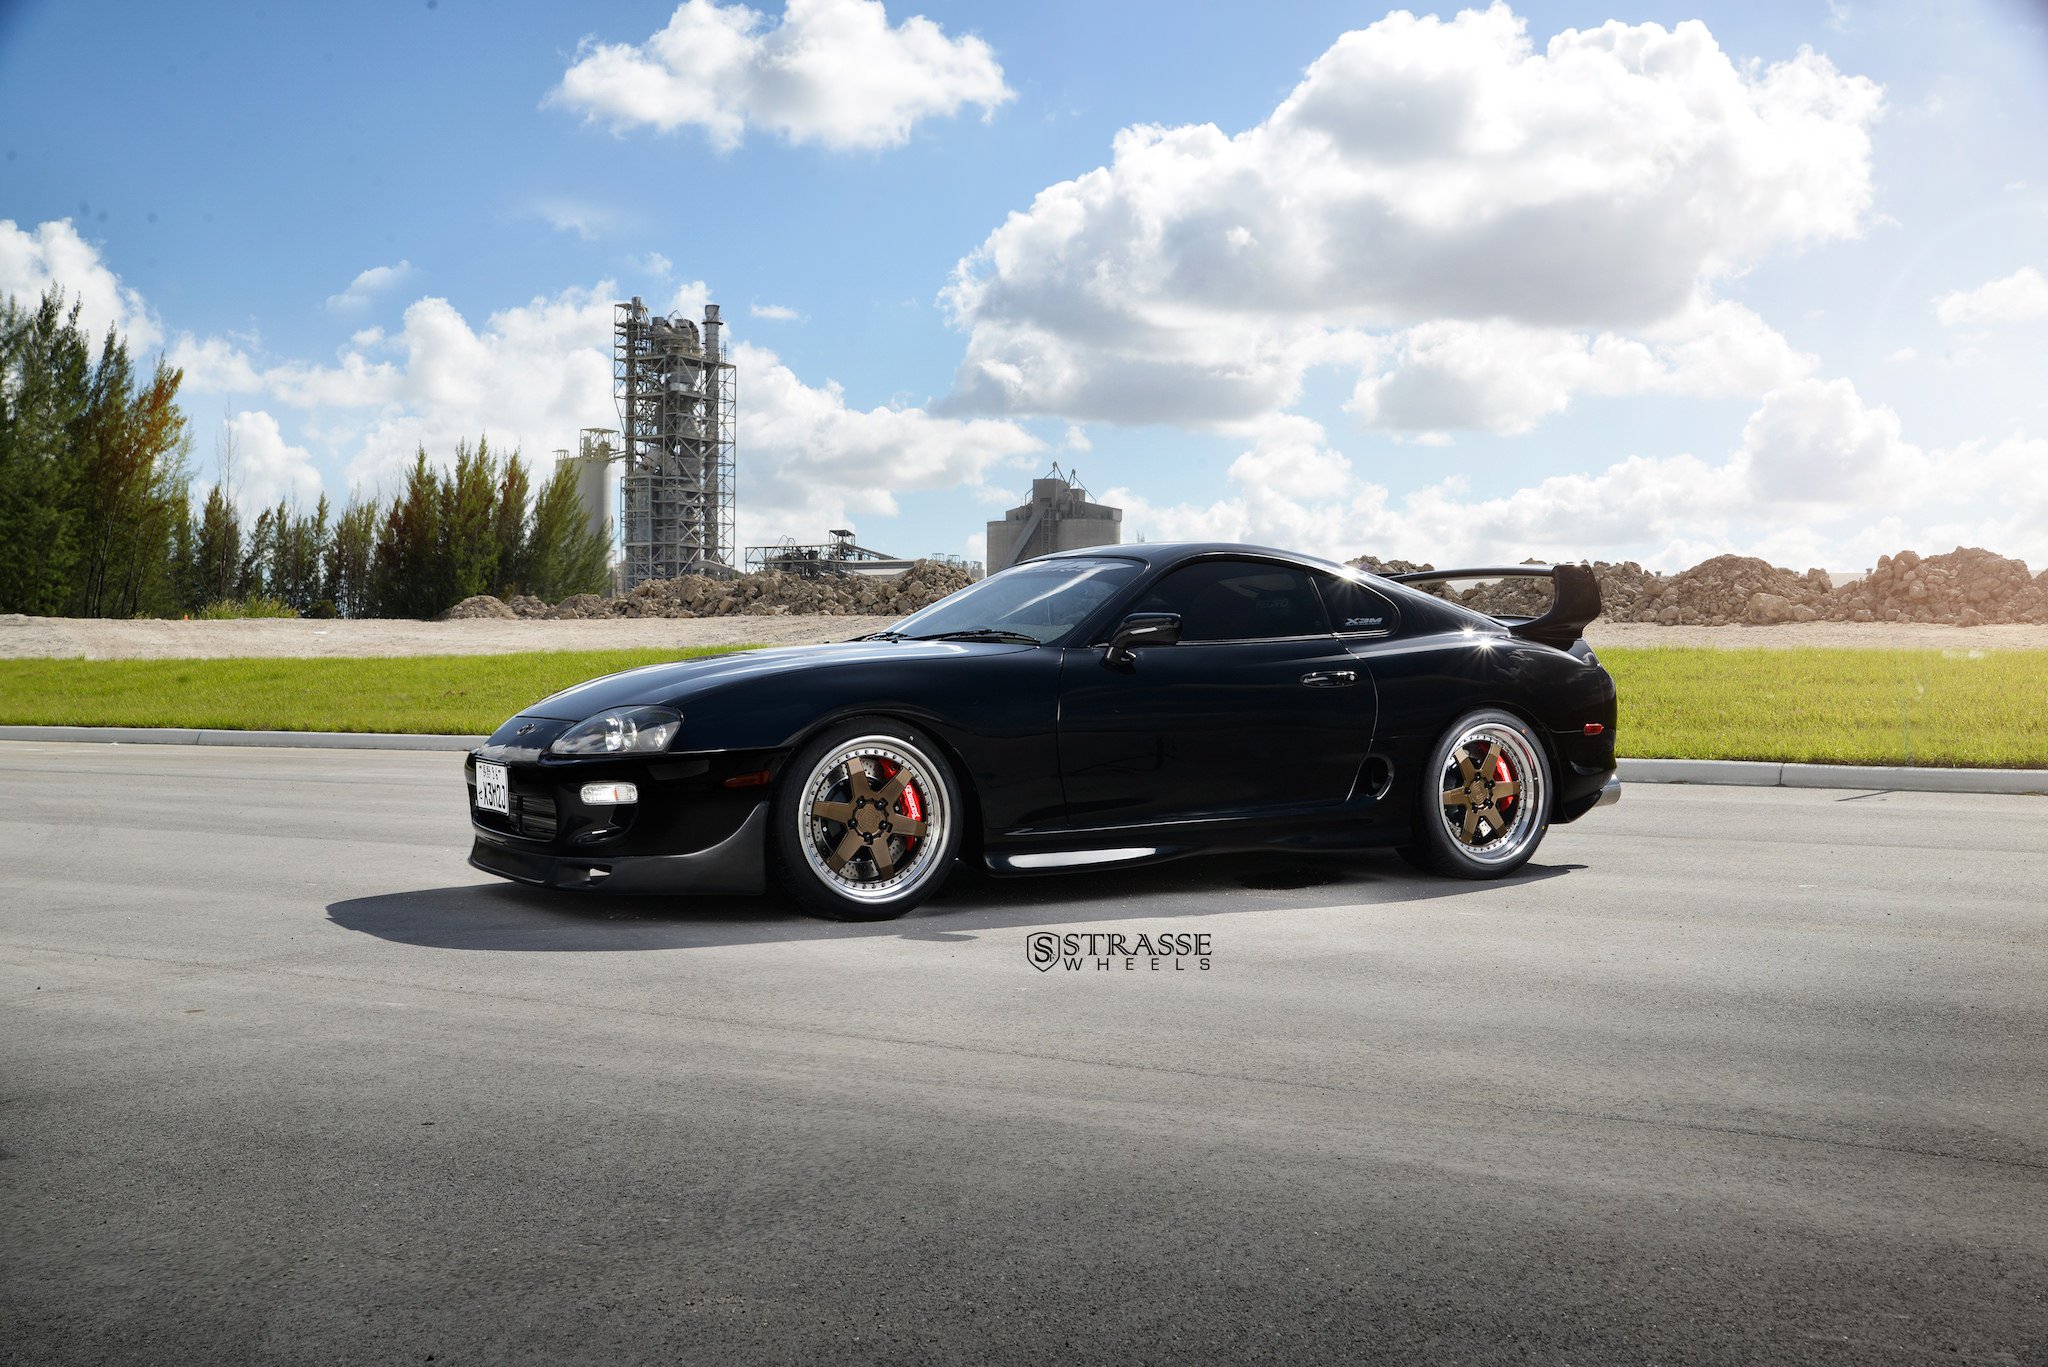 strasse, Wheels, Toyota, Supra, By, Xtreme, Autowerke, Cars, Black, Coupe Wallpaper